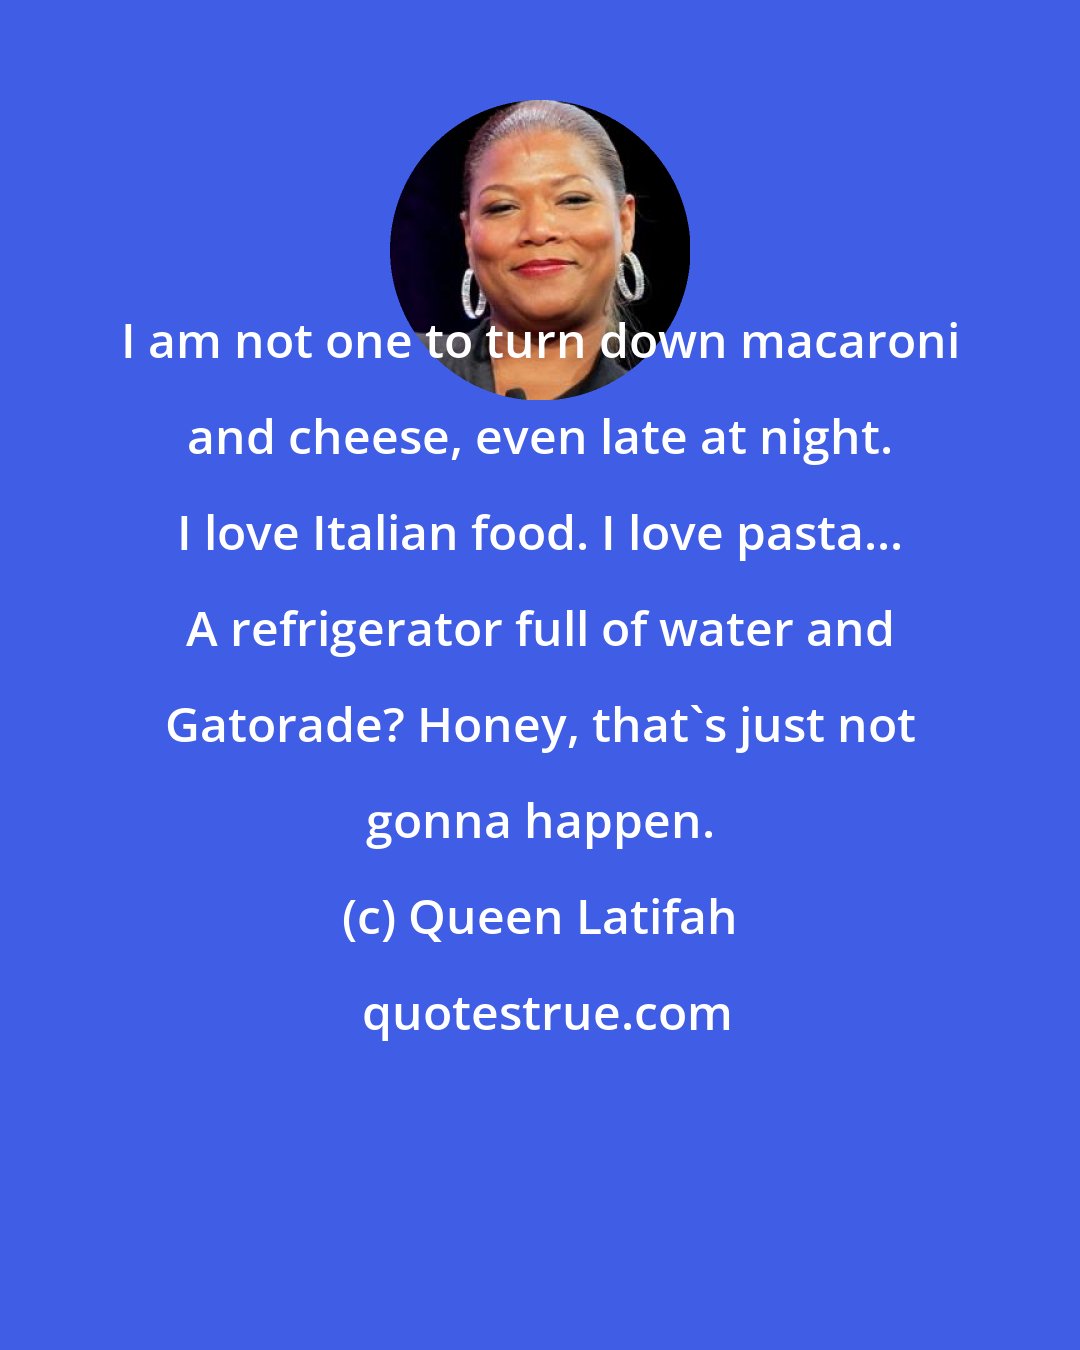 Queen Latifah: I am not one to turn down macaroni and cheese, even late at night. I love Italian food. I love pasta... A refrigerator full of water and Gatorade? Honey, that's just not gonna happen.